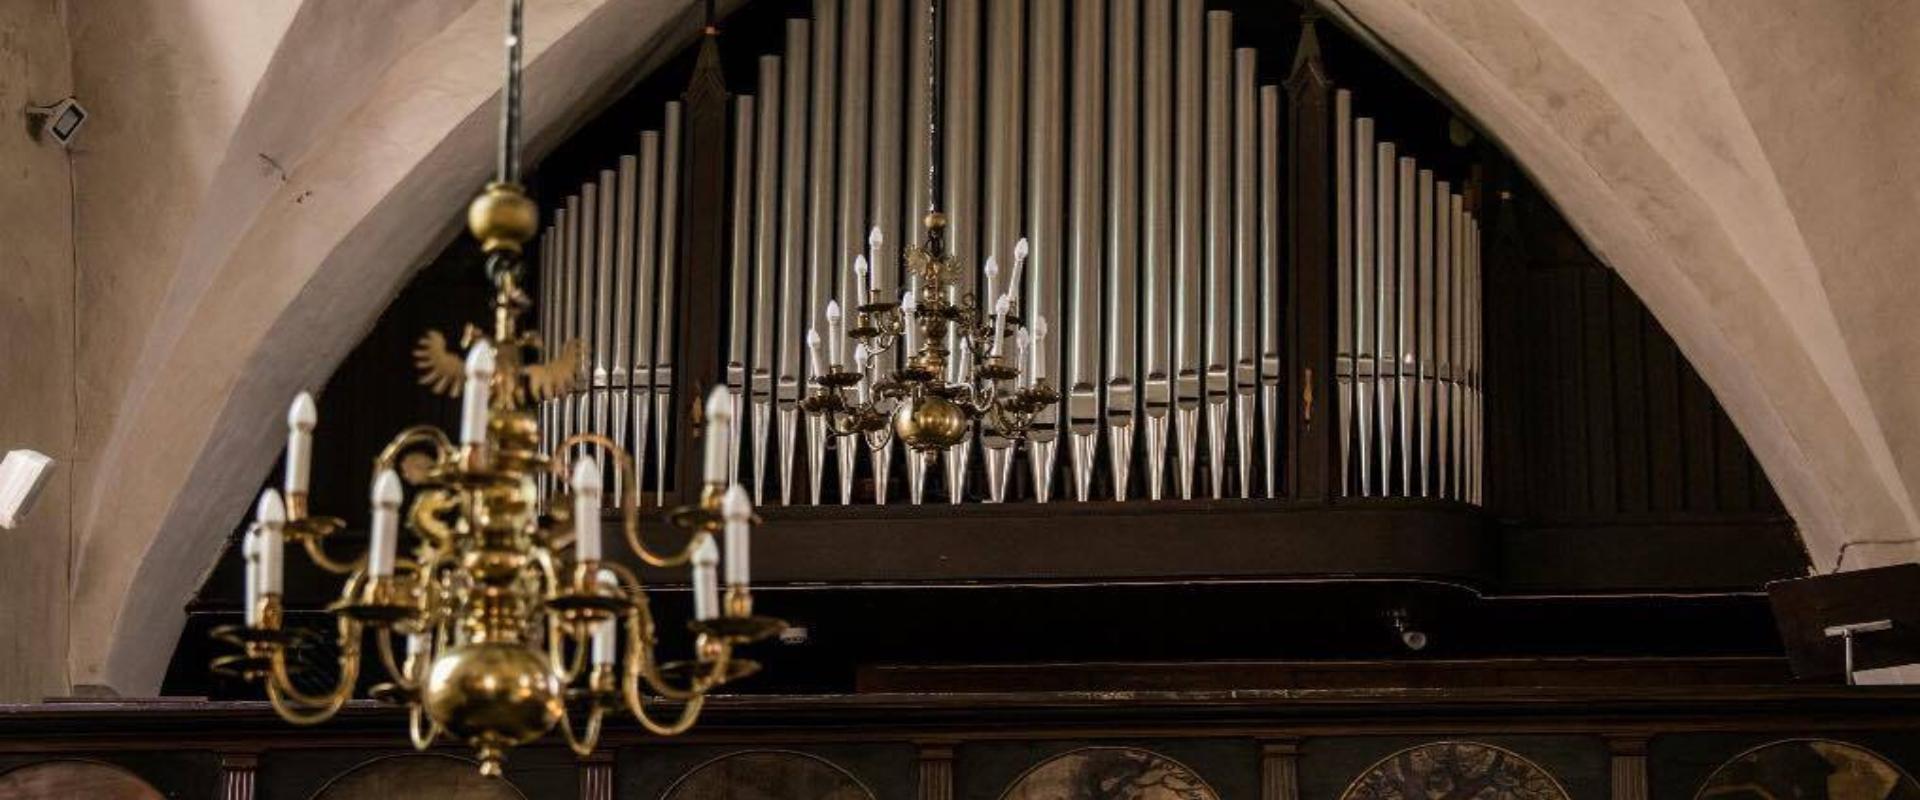 Dear music lover, we invite you to the concert evening of the Church of the Holy Spirit! Every Monday evening is dedicated to music and sounds that cr